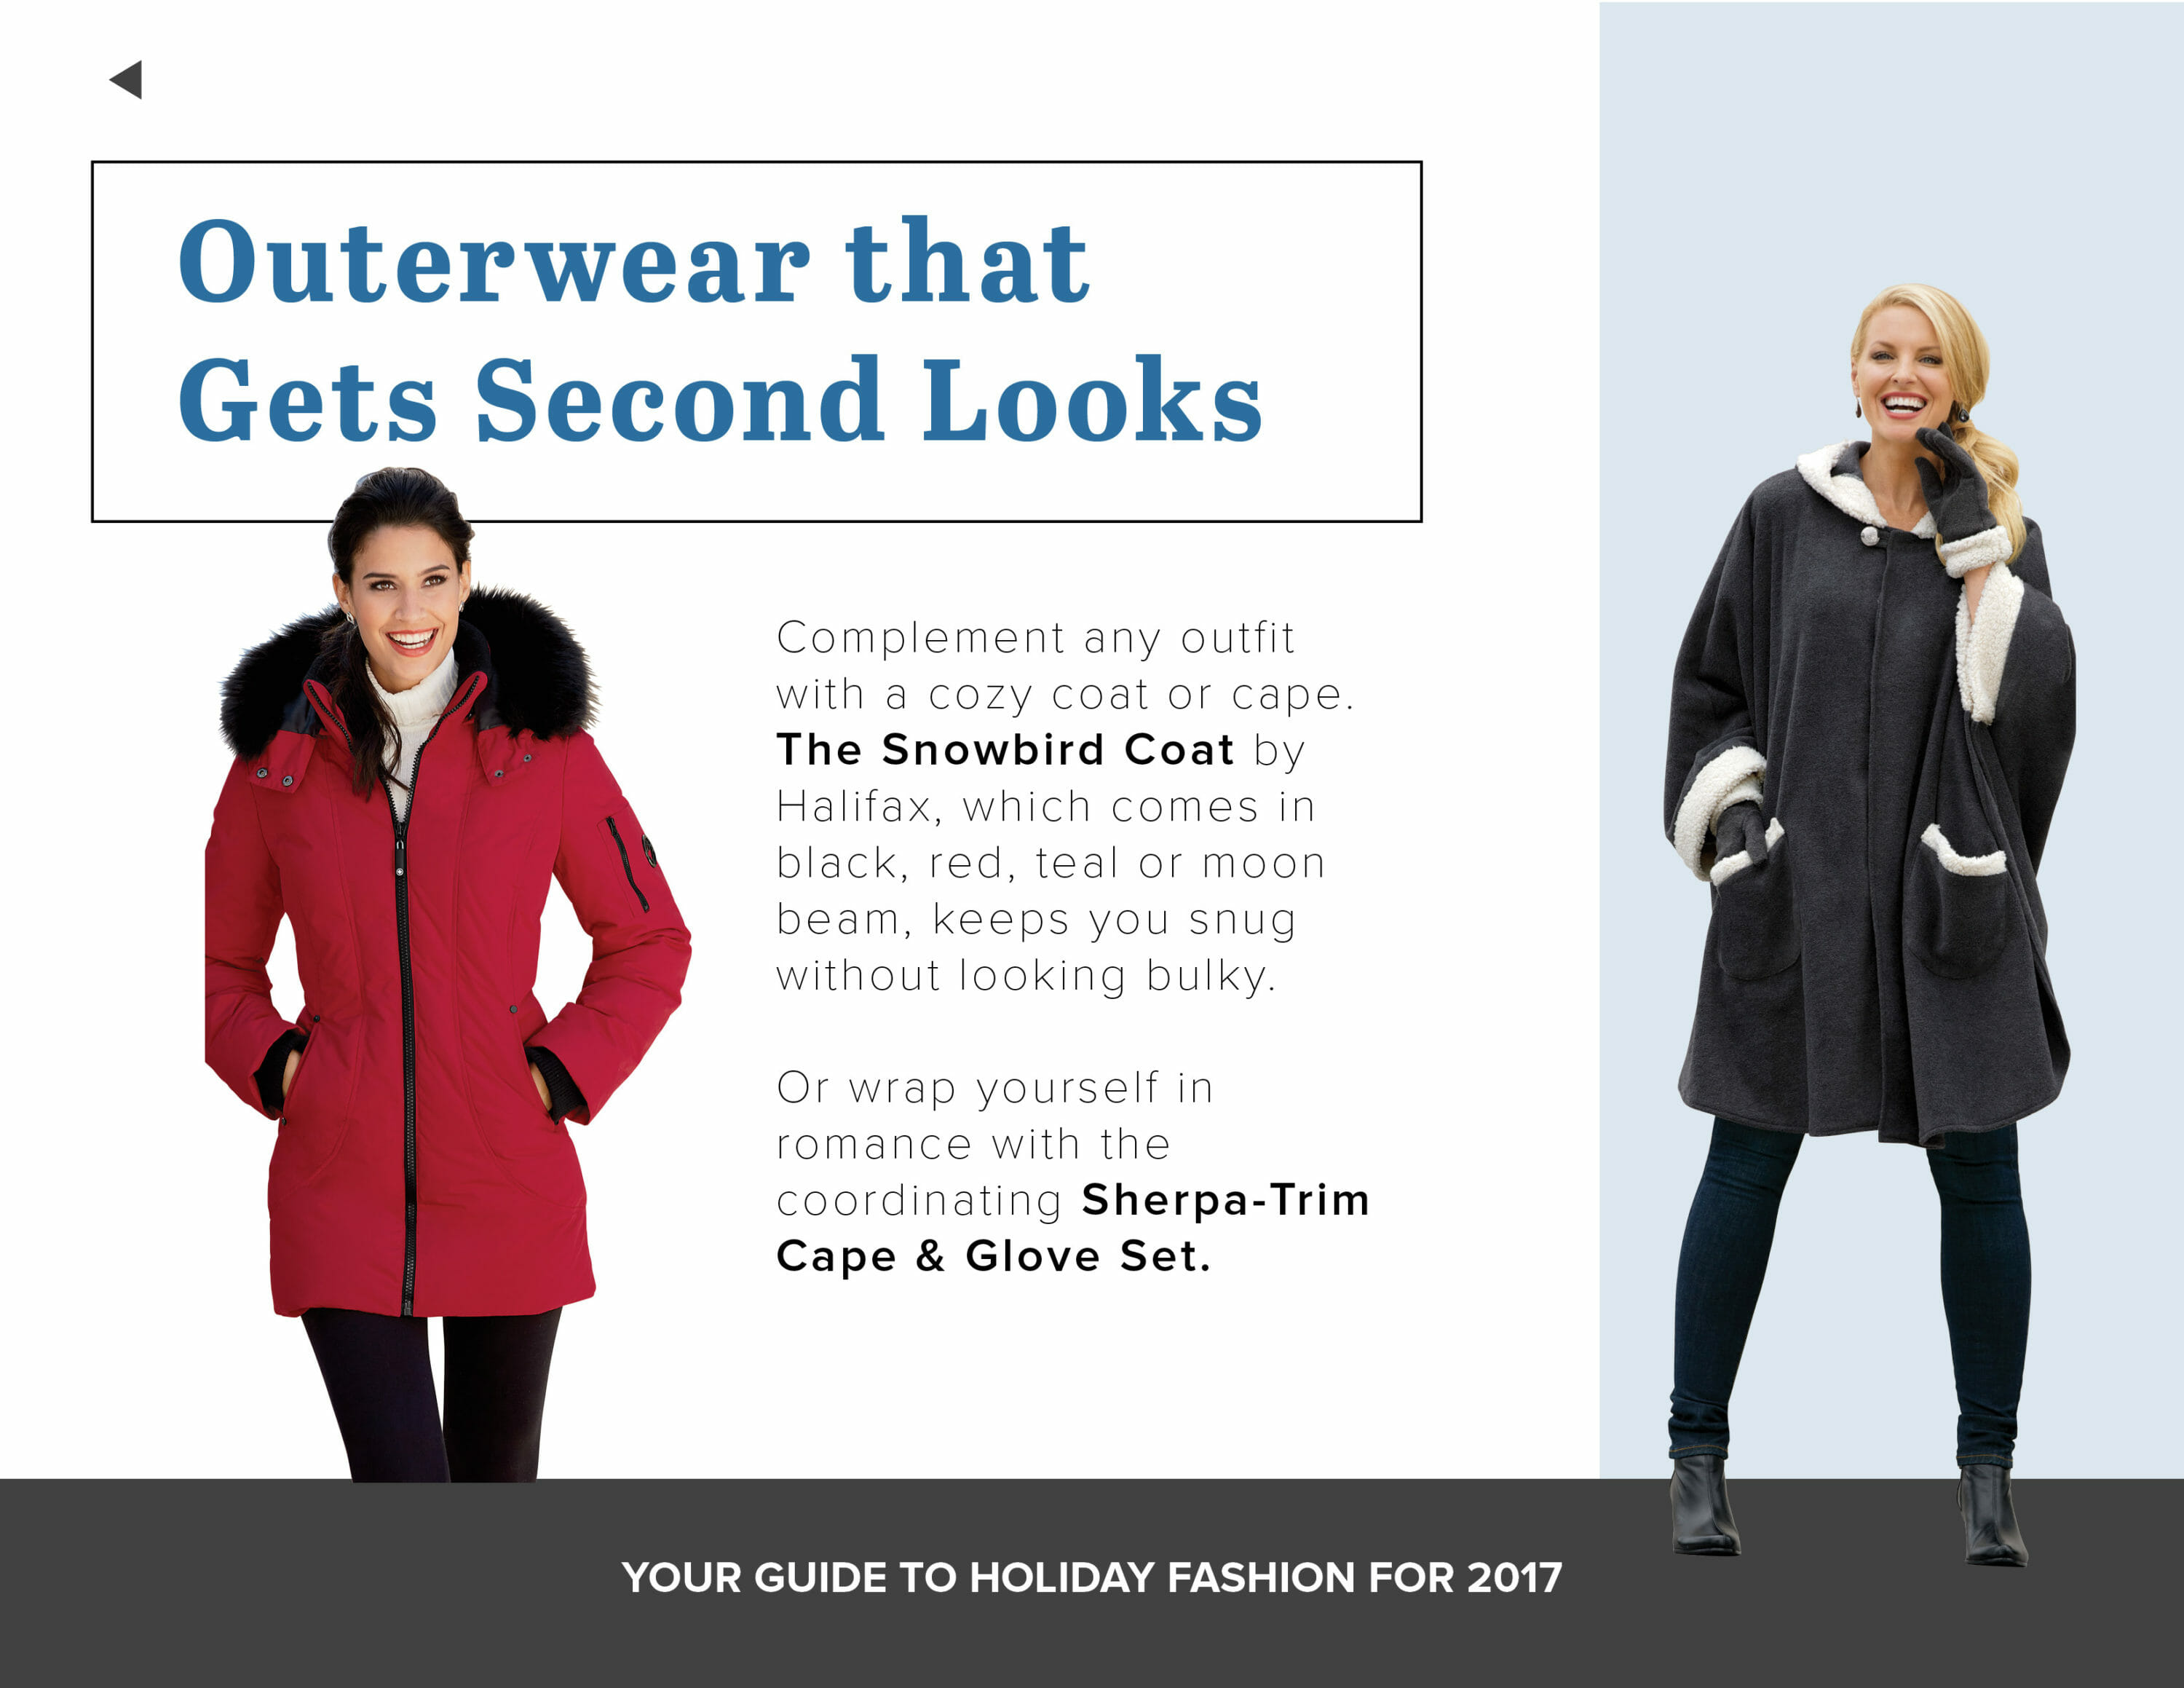 2 women in different style coats